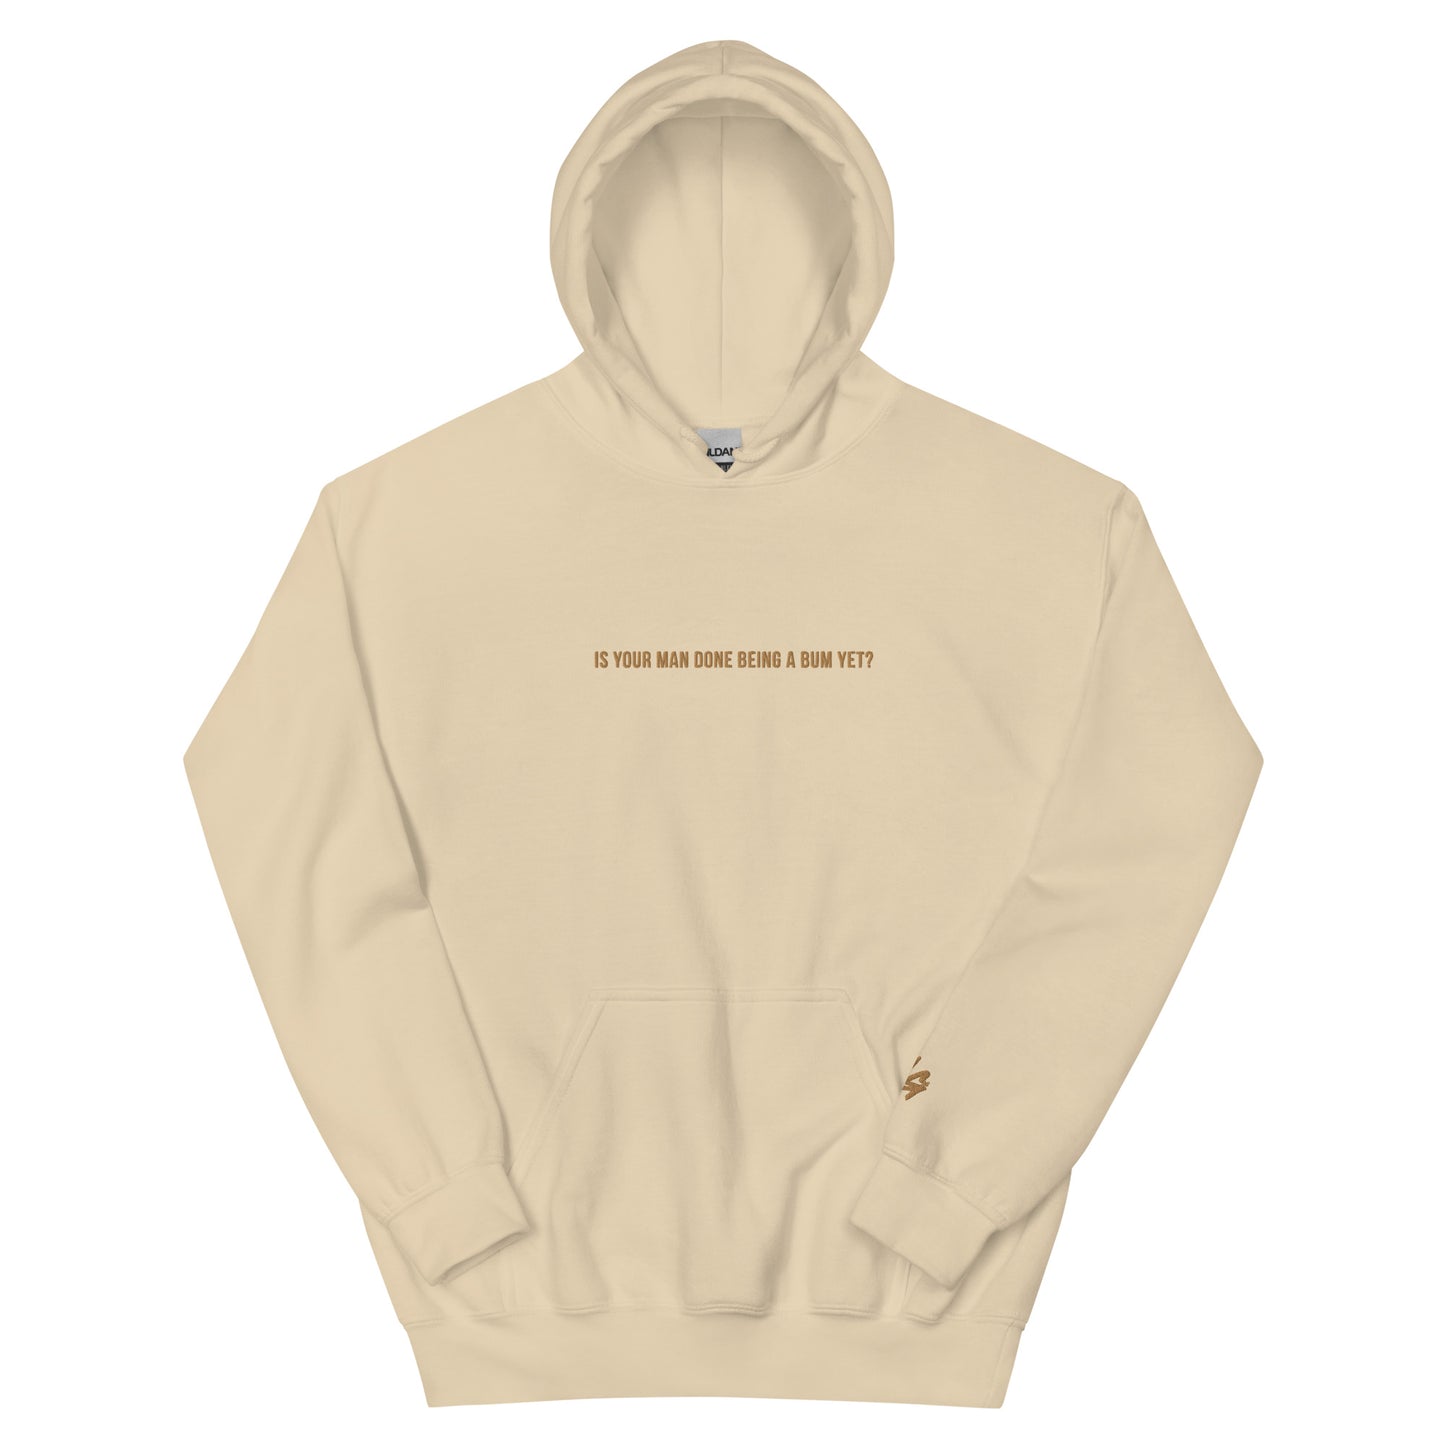 "Is Your Man Done Being A Bum Yet?" Hoodie